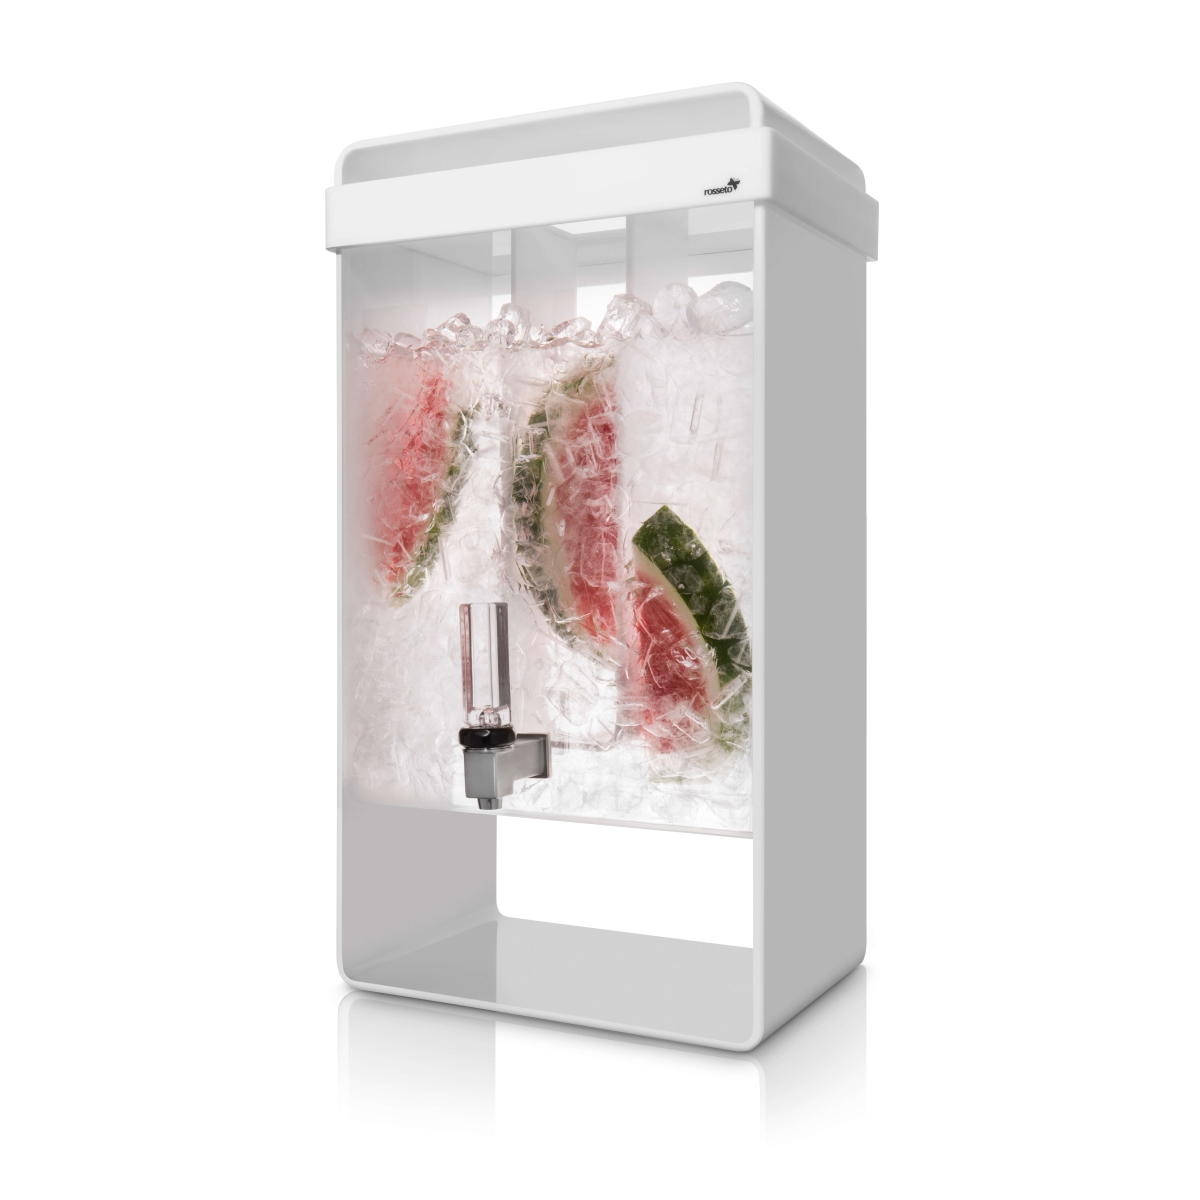 Picture of Rosseto LD155 5 gal Infusion White Beverage Dispenser